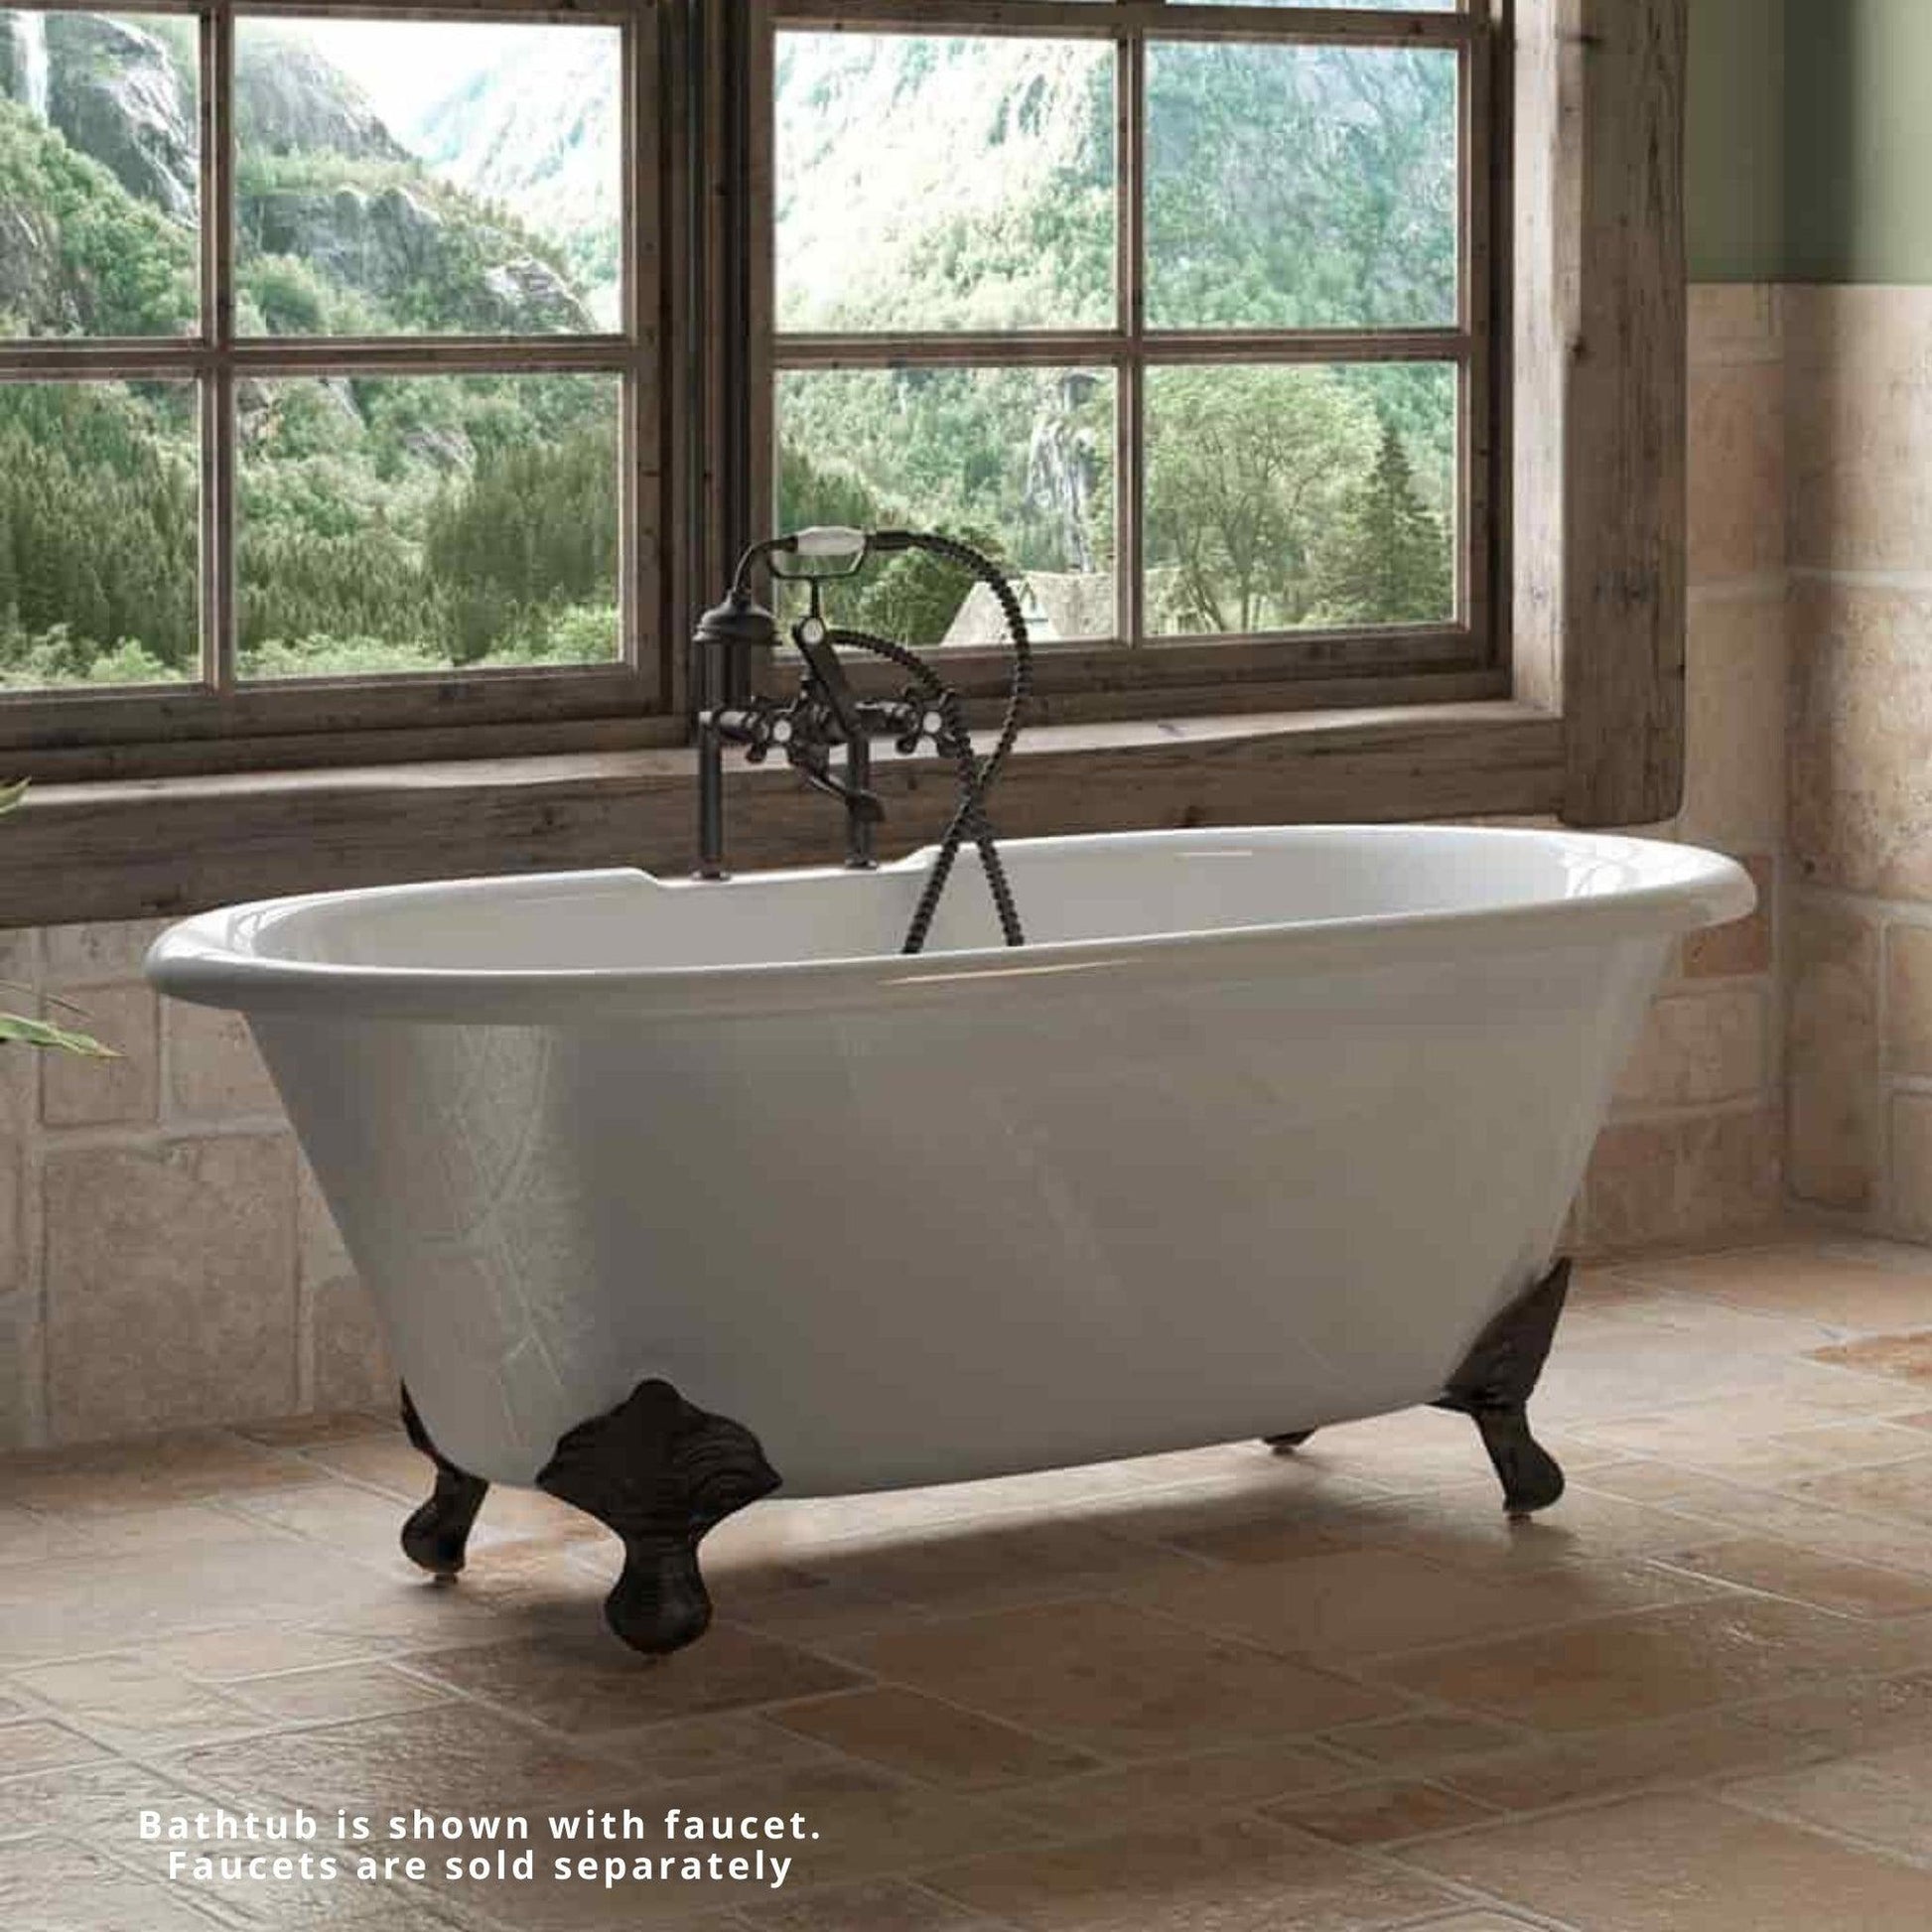 Cambridge Plumbing 67" White Cast Iron Double Ended Bathtub With Deck Holes With Oil Rubbed Bronze Feet